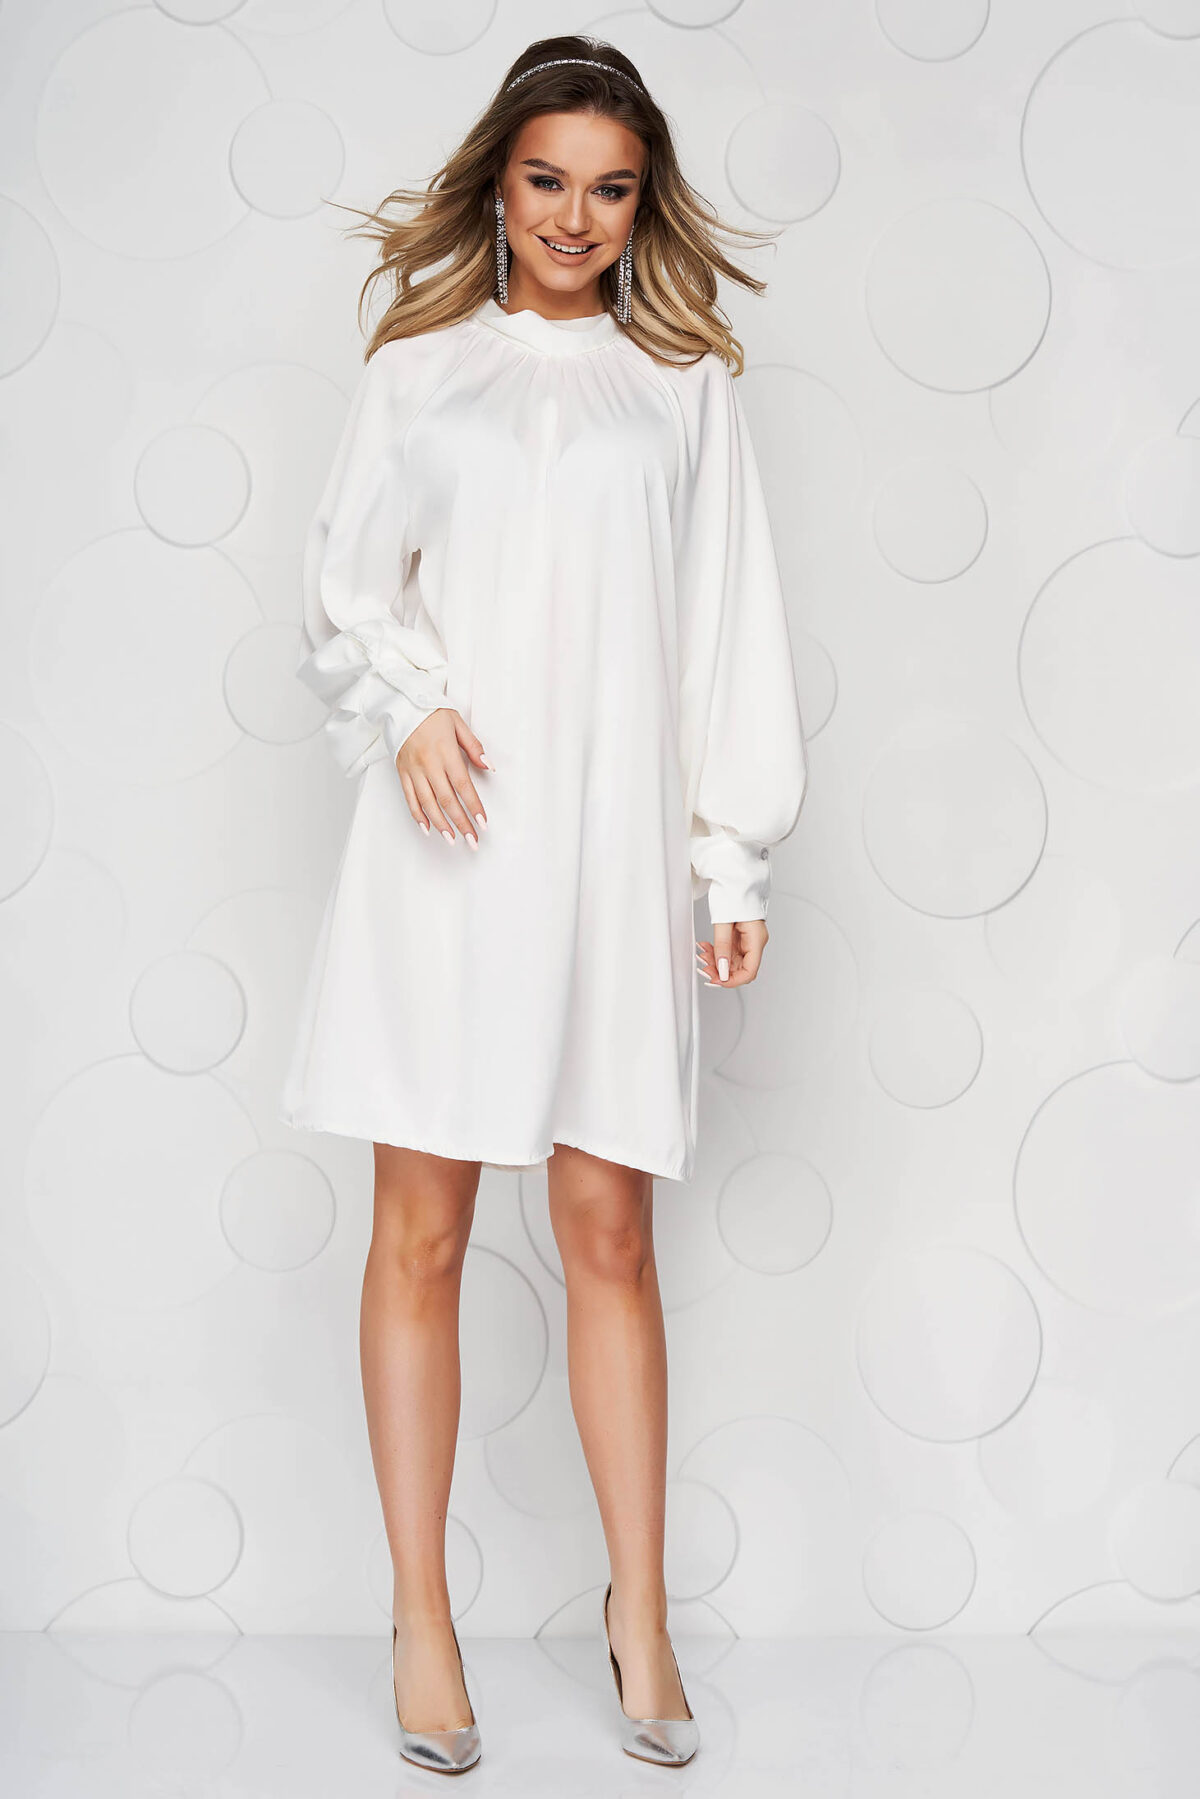 White Dress From Satin With Puffed Sleeves Loose Fit Bow Accessory